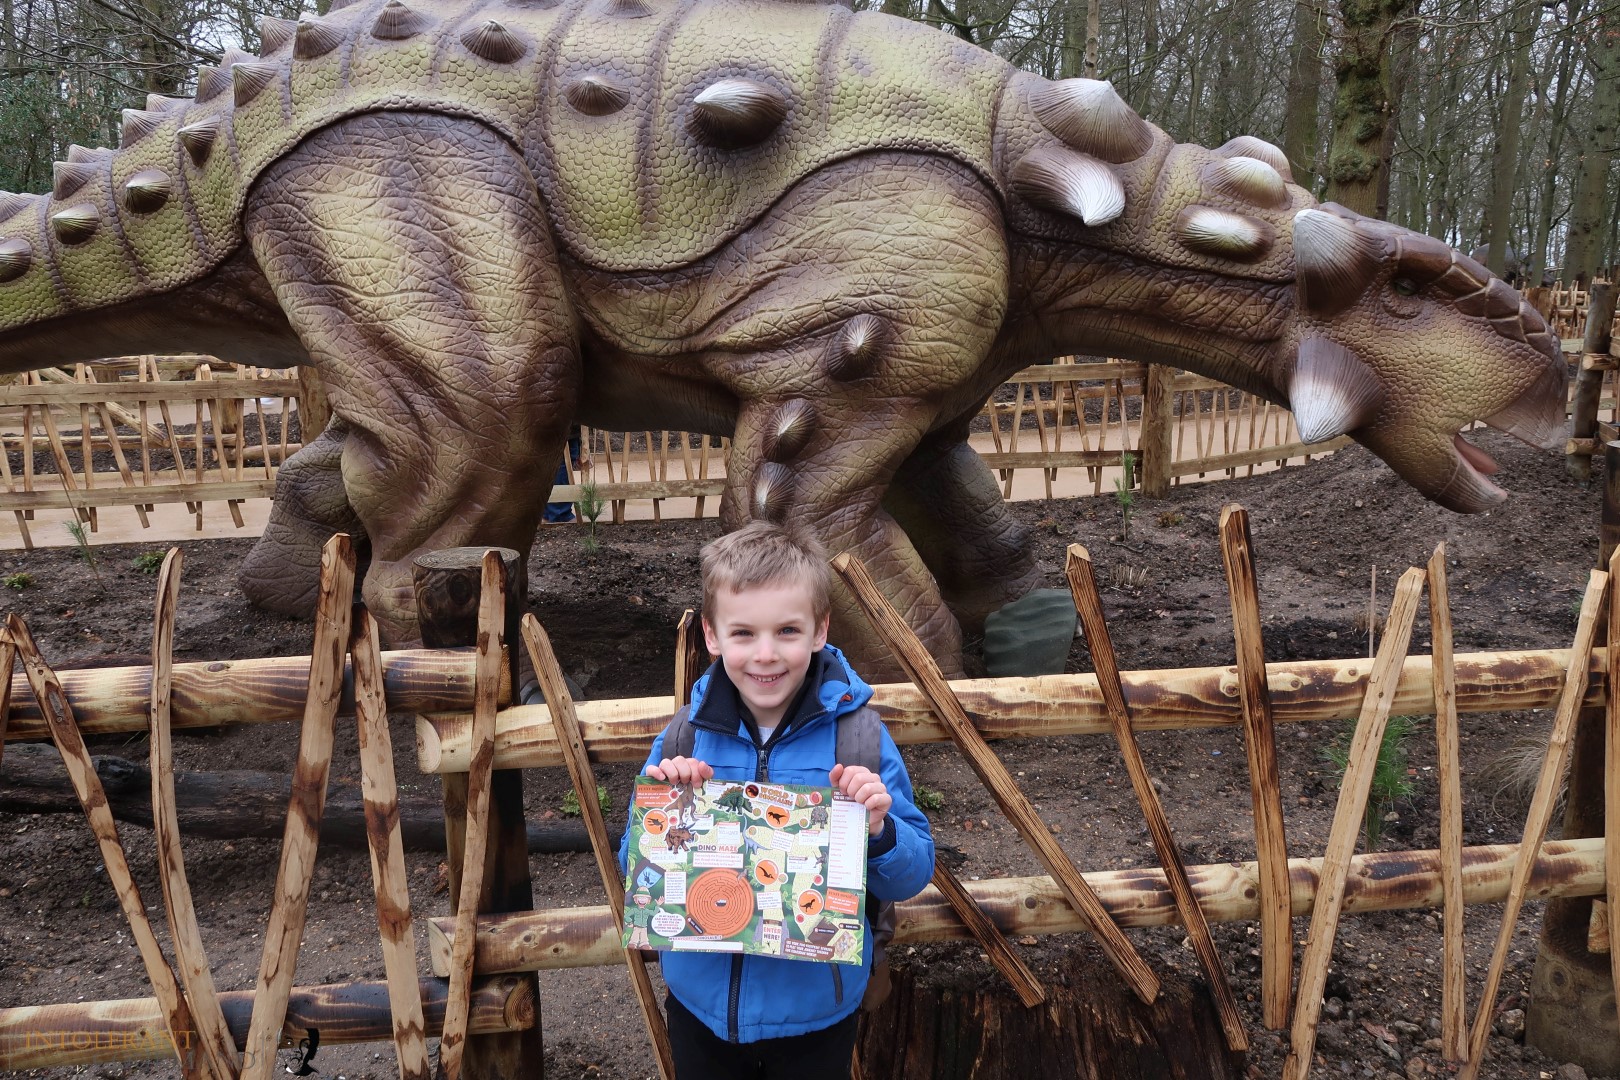 World of Dinosaurs - part of Paradise Wildlife Park! It's an enclosure packed with 30 life size, moving and animated dinosaurs, featuring T-Rex, Stegosaurus, Tricerotops and more! It's a wonderful family day out with lots to explore! www.intolerantgourmand,com